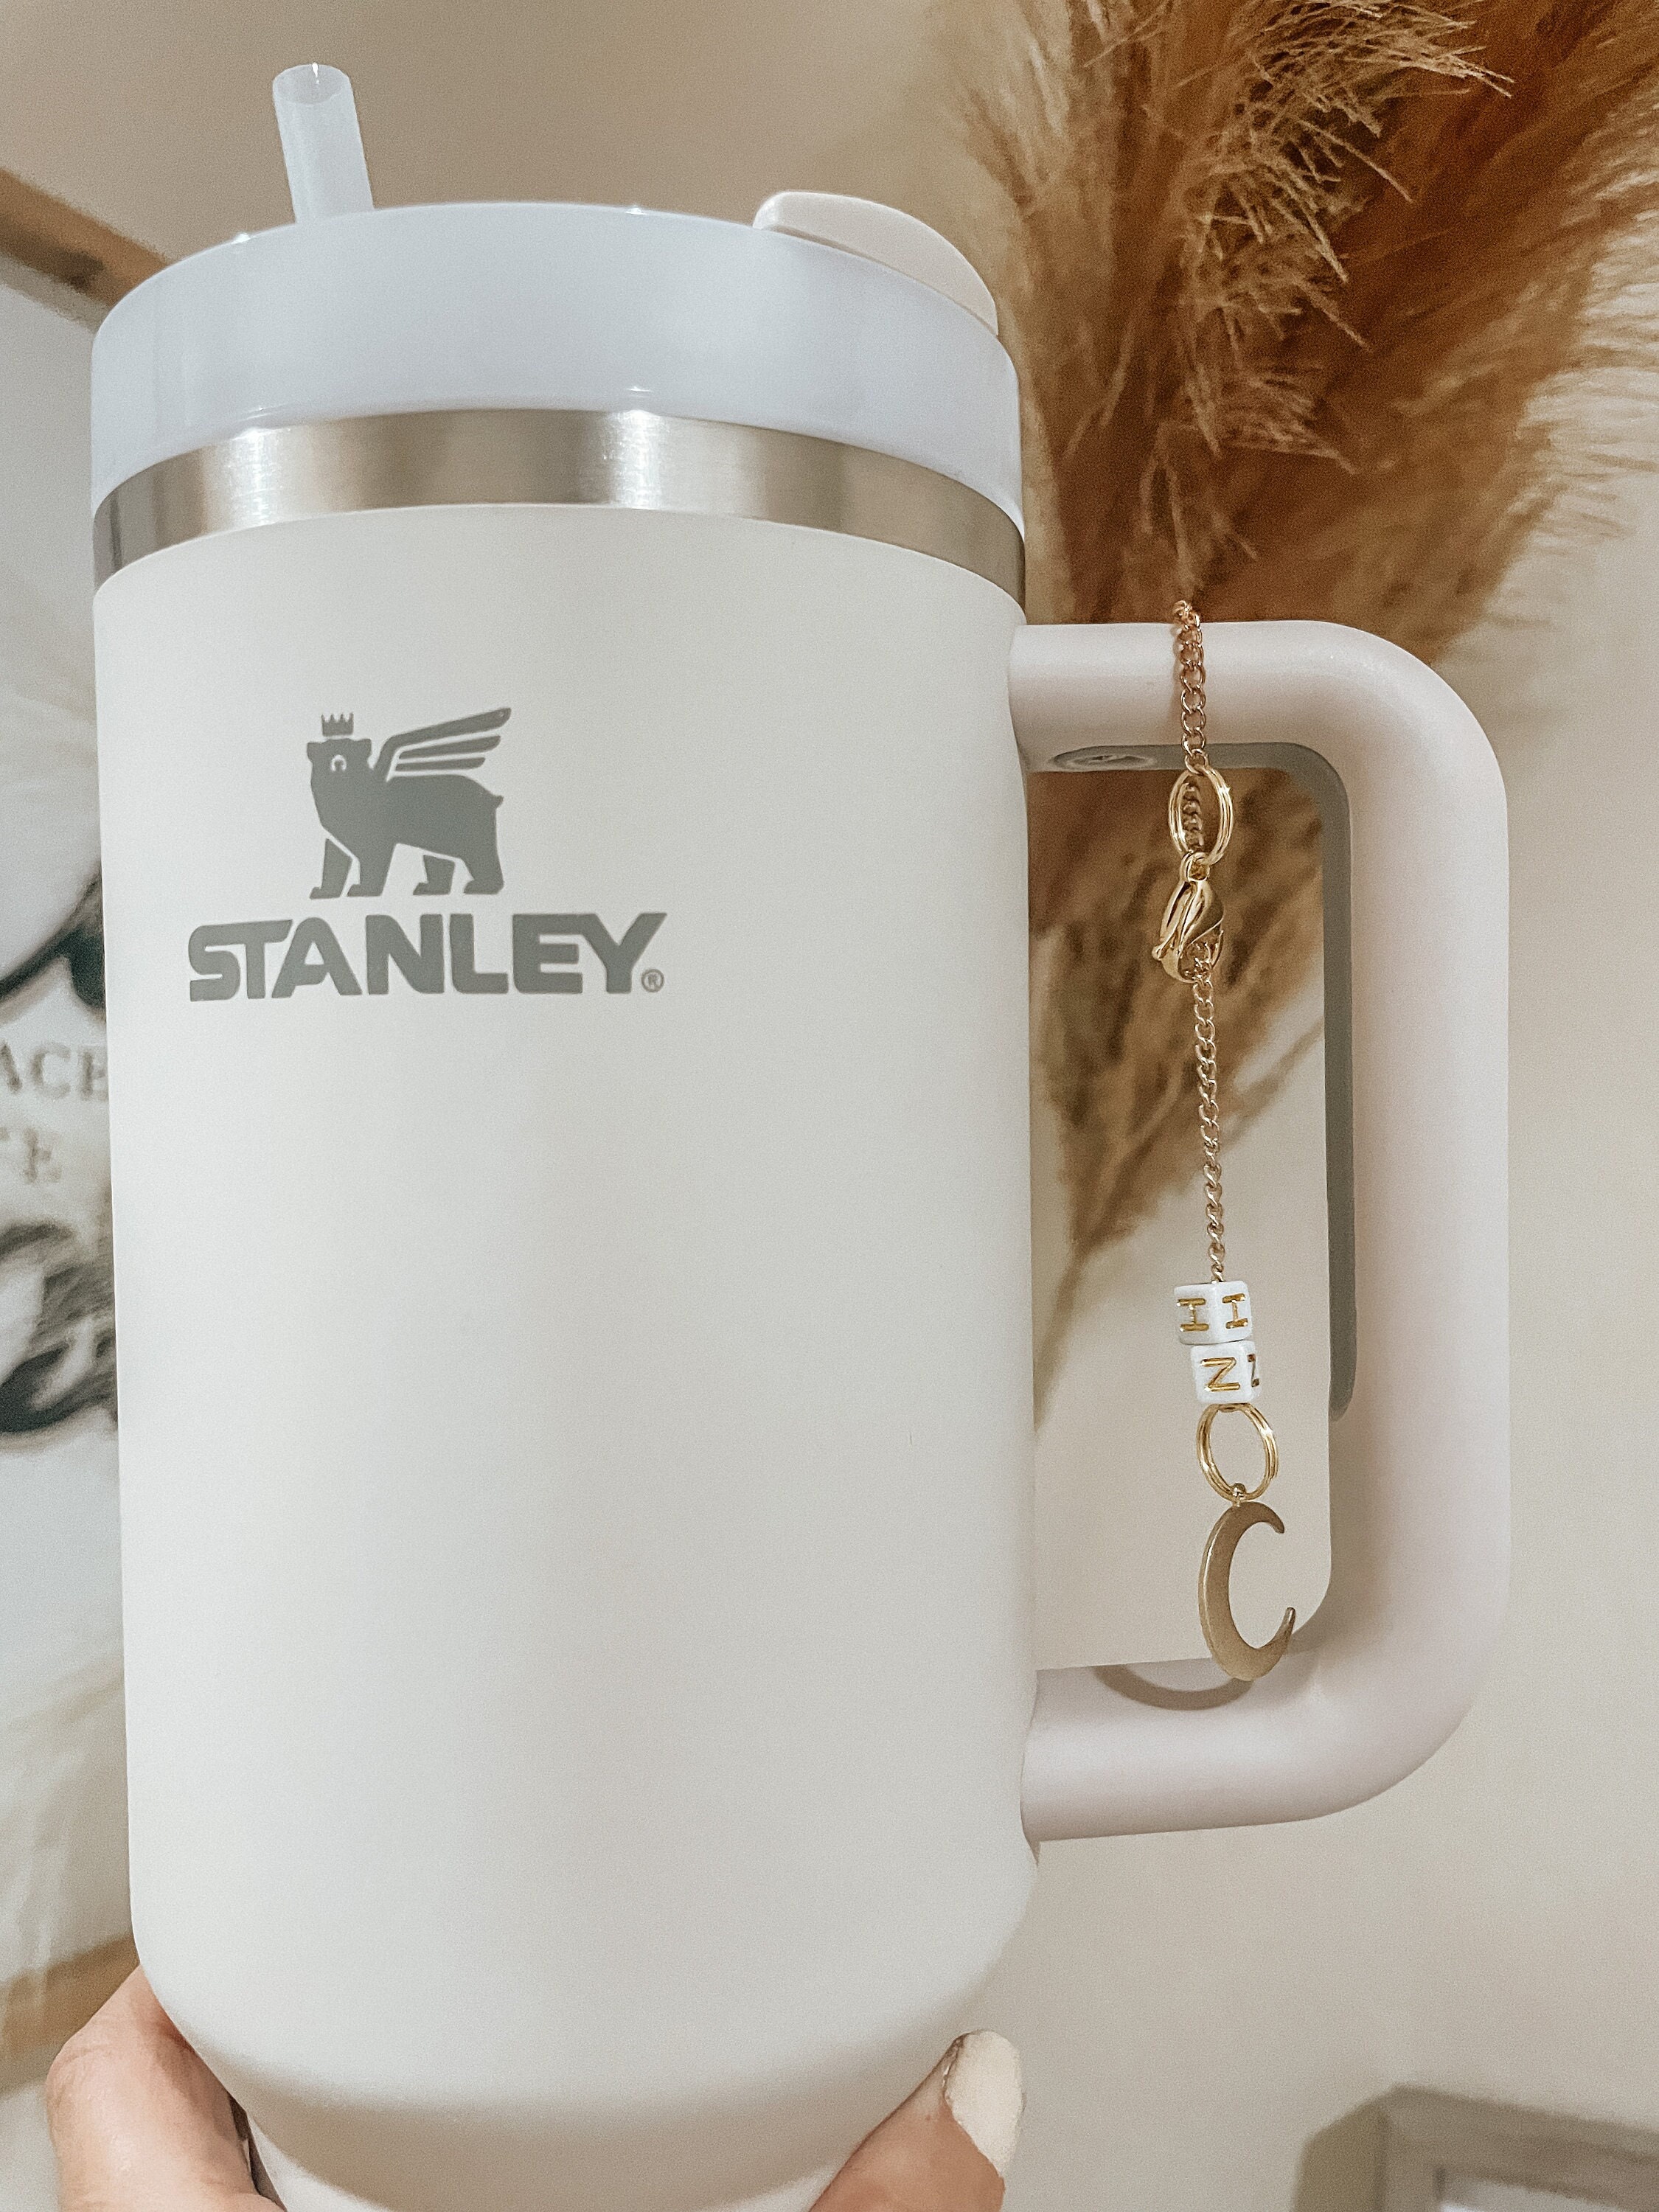 Stanley Tumbler Cup Moon Charm Accessories for Water Bottle Stanley Cup  Tumbler Handle Charm Stanley Accessories Water Bottle Charm 